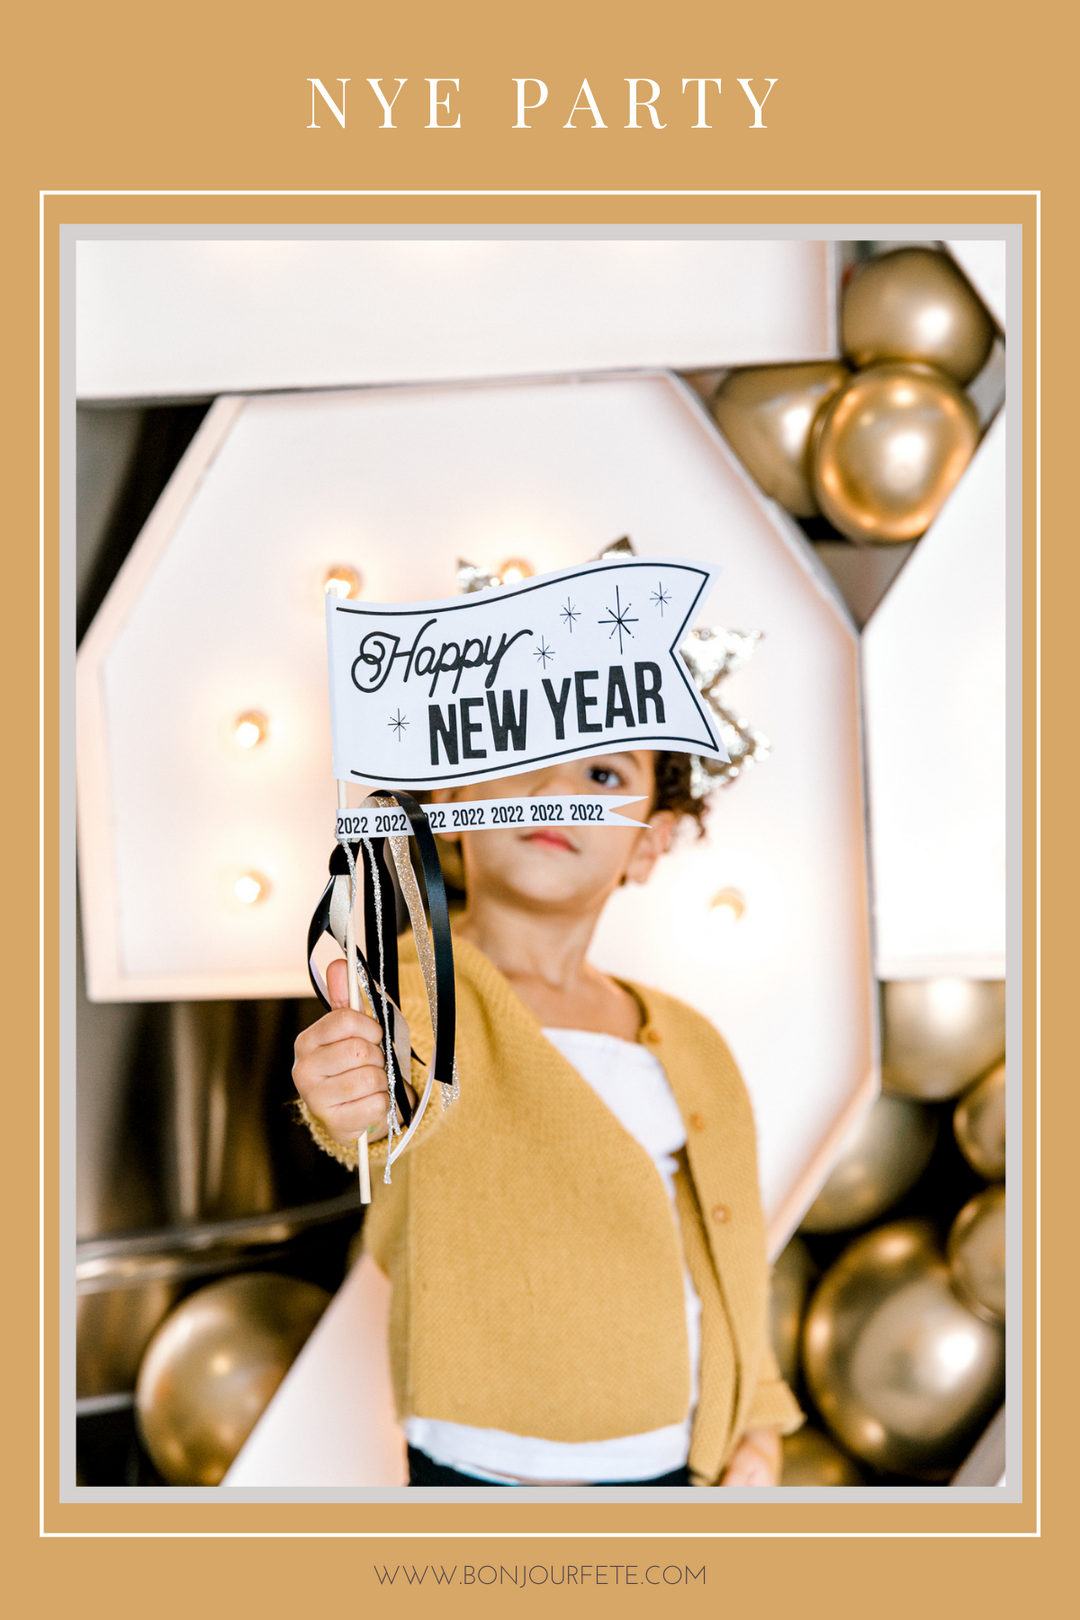 DISCO THEMED NEW YEAR'S EVE PARTY IDEAS